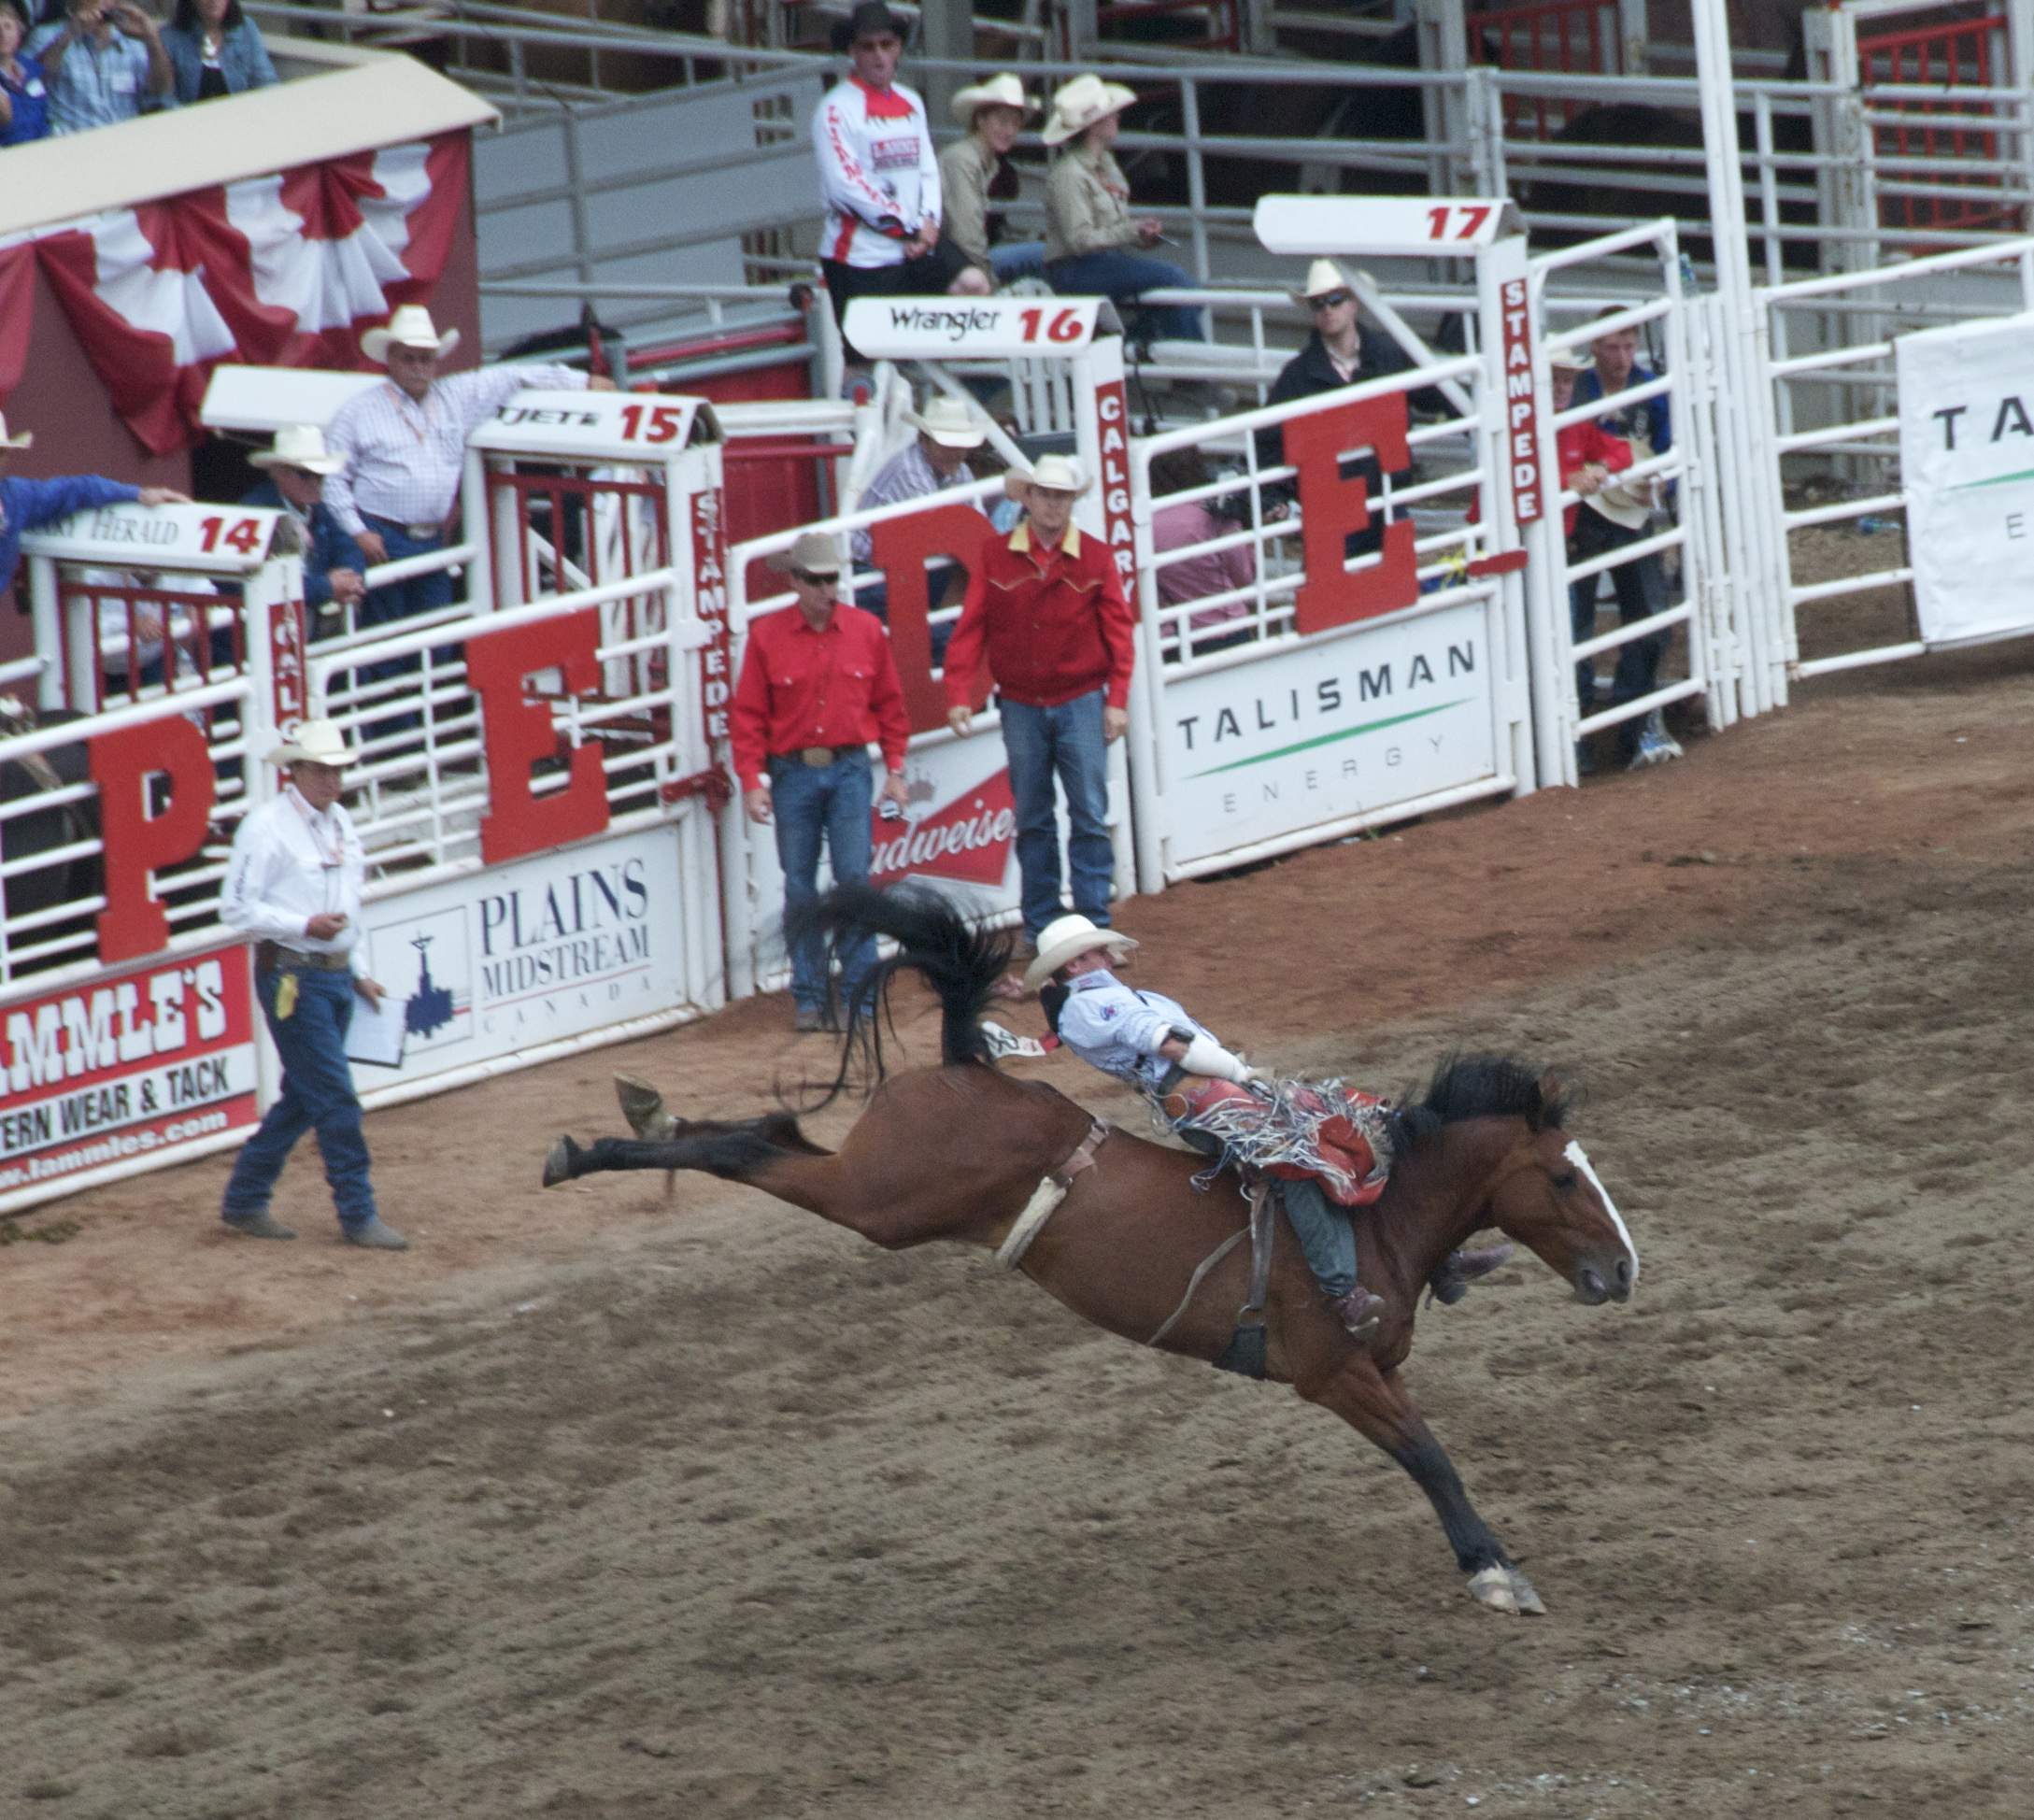 38 photos of the annual Calgary Stampede in Canada | BOOMSbeat